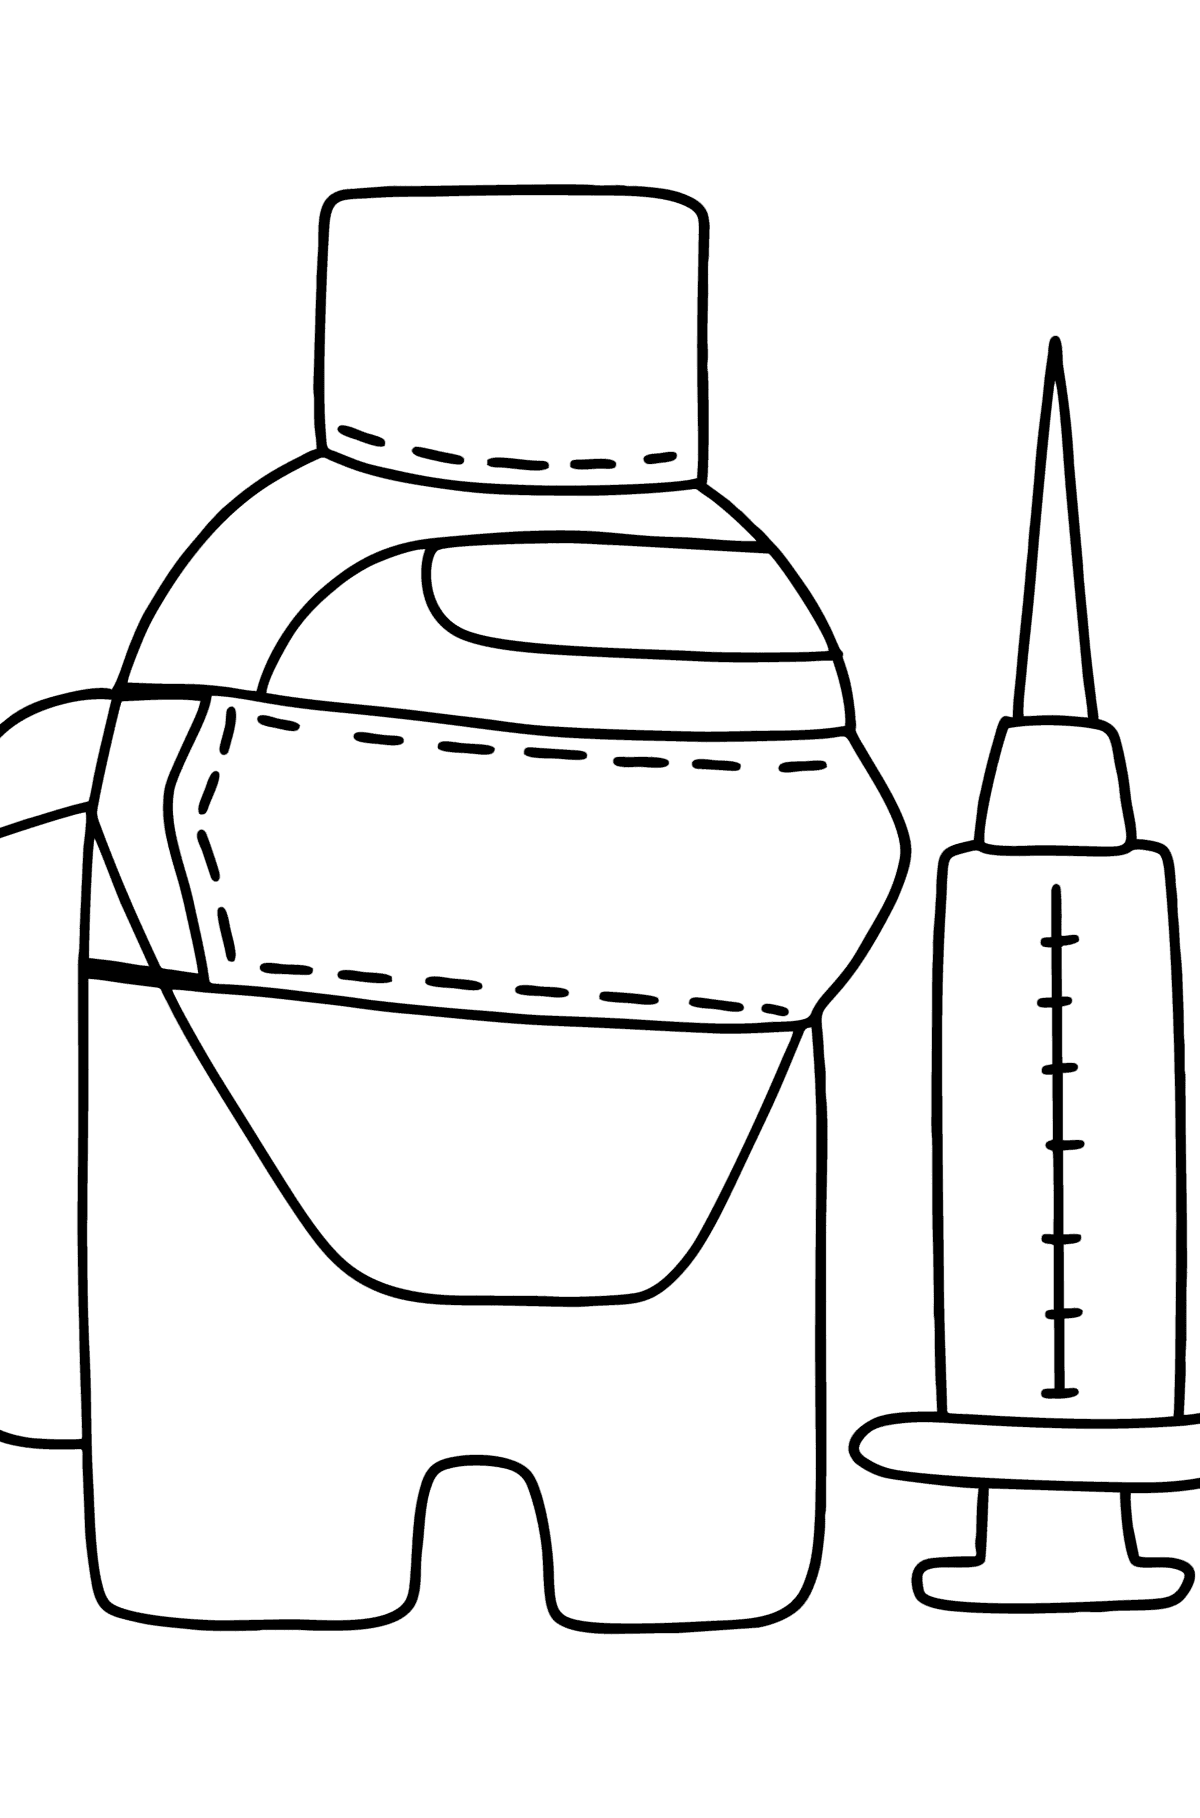 Among Us coloring page Online - Coloring Pages for Kids